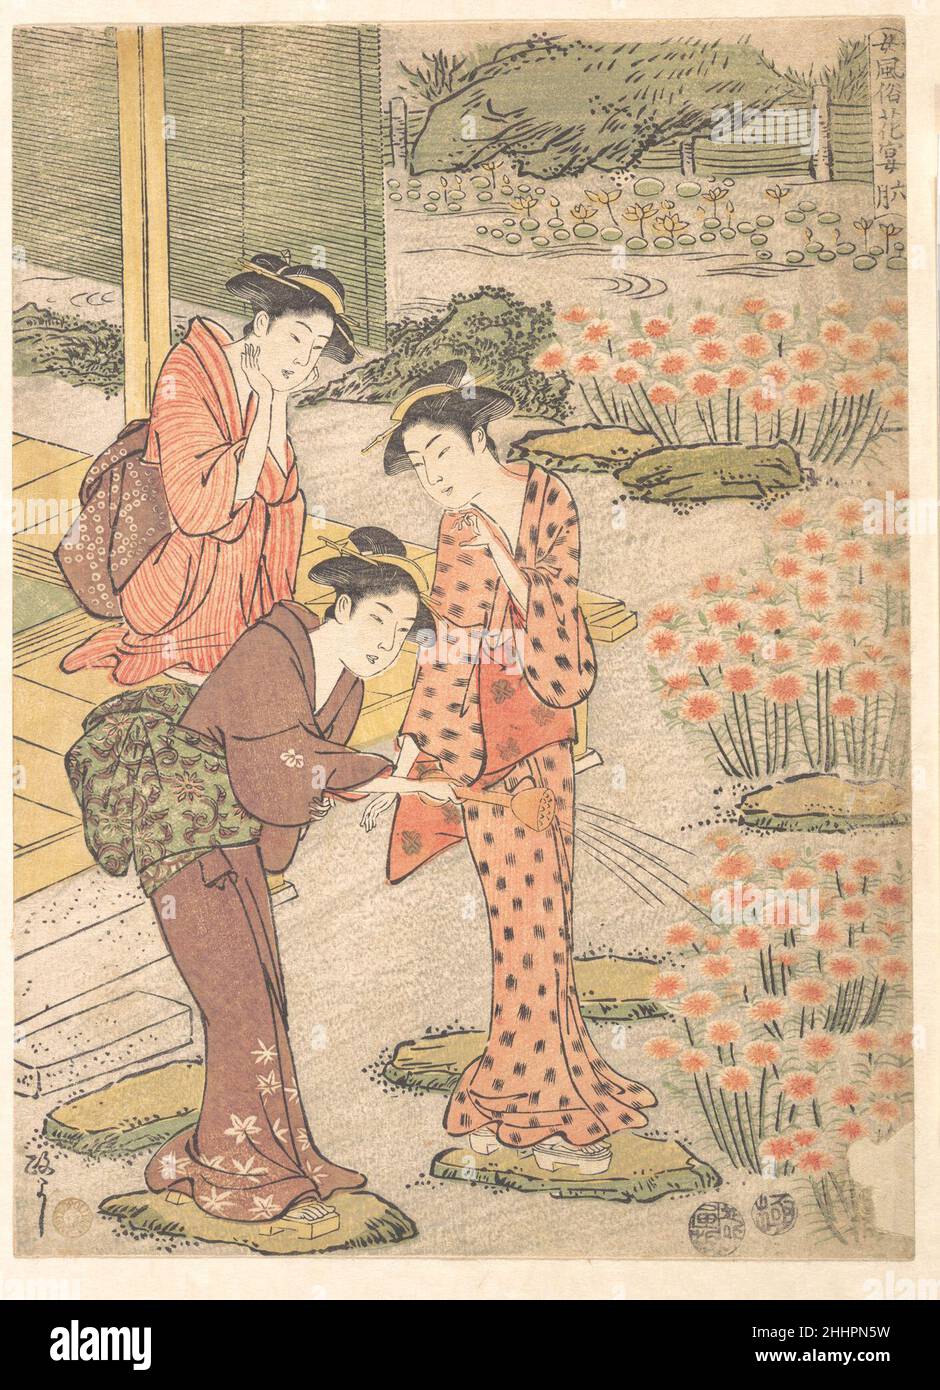 Three Young Women in a Garden where Nadeshiko Pinks are Growing ca. 1790 Kuwagata Keisai Japanese. Three Young Women in a Garden where Nadeshiko Pinks are Growing. Kuwagata Keisai (Japanese, 1764–1824). Japan. ca. 1790. Woodblock print; ink and color on paper. Edo period (1615–1868). Prints Stock Photo